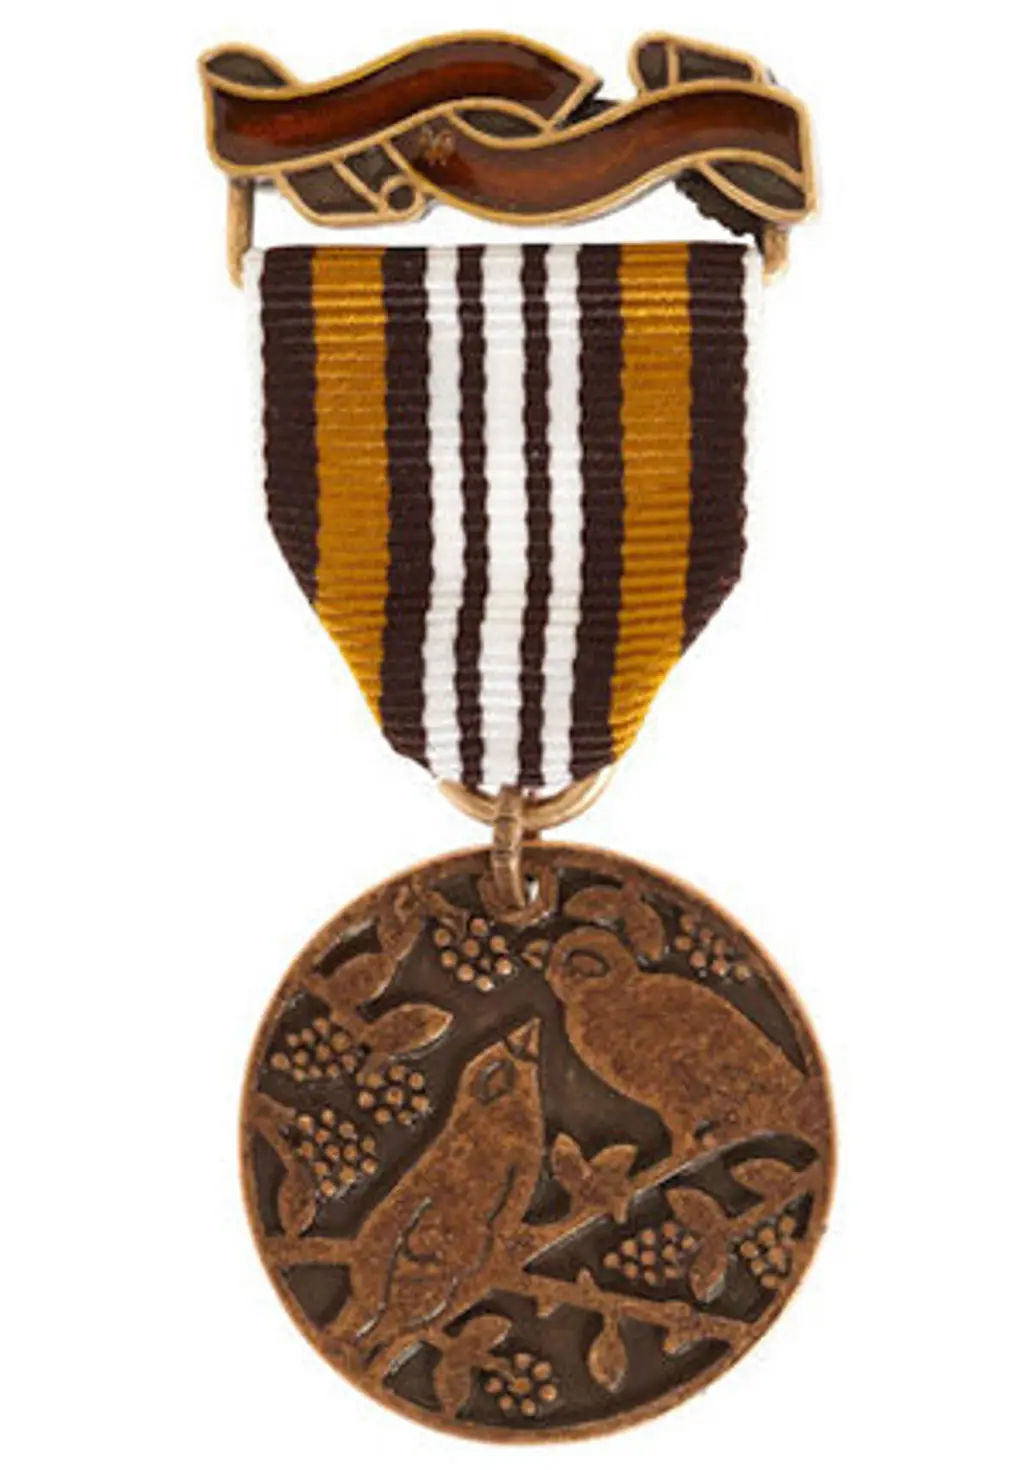 Medal of Honor, Sparrow or Owl